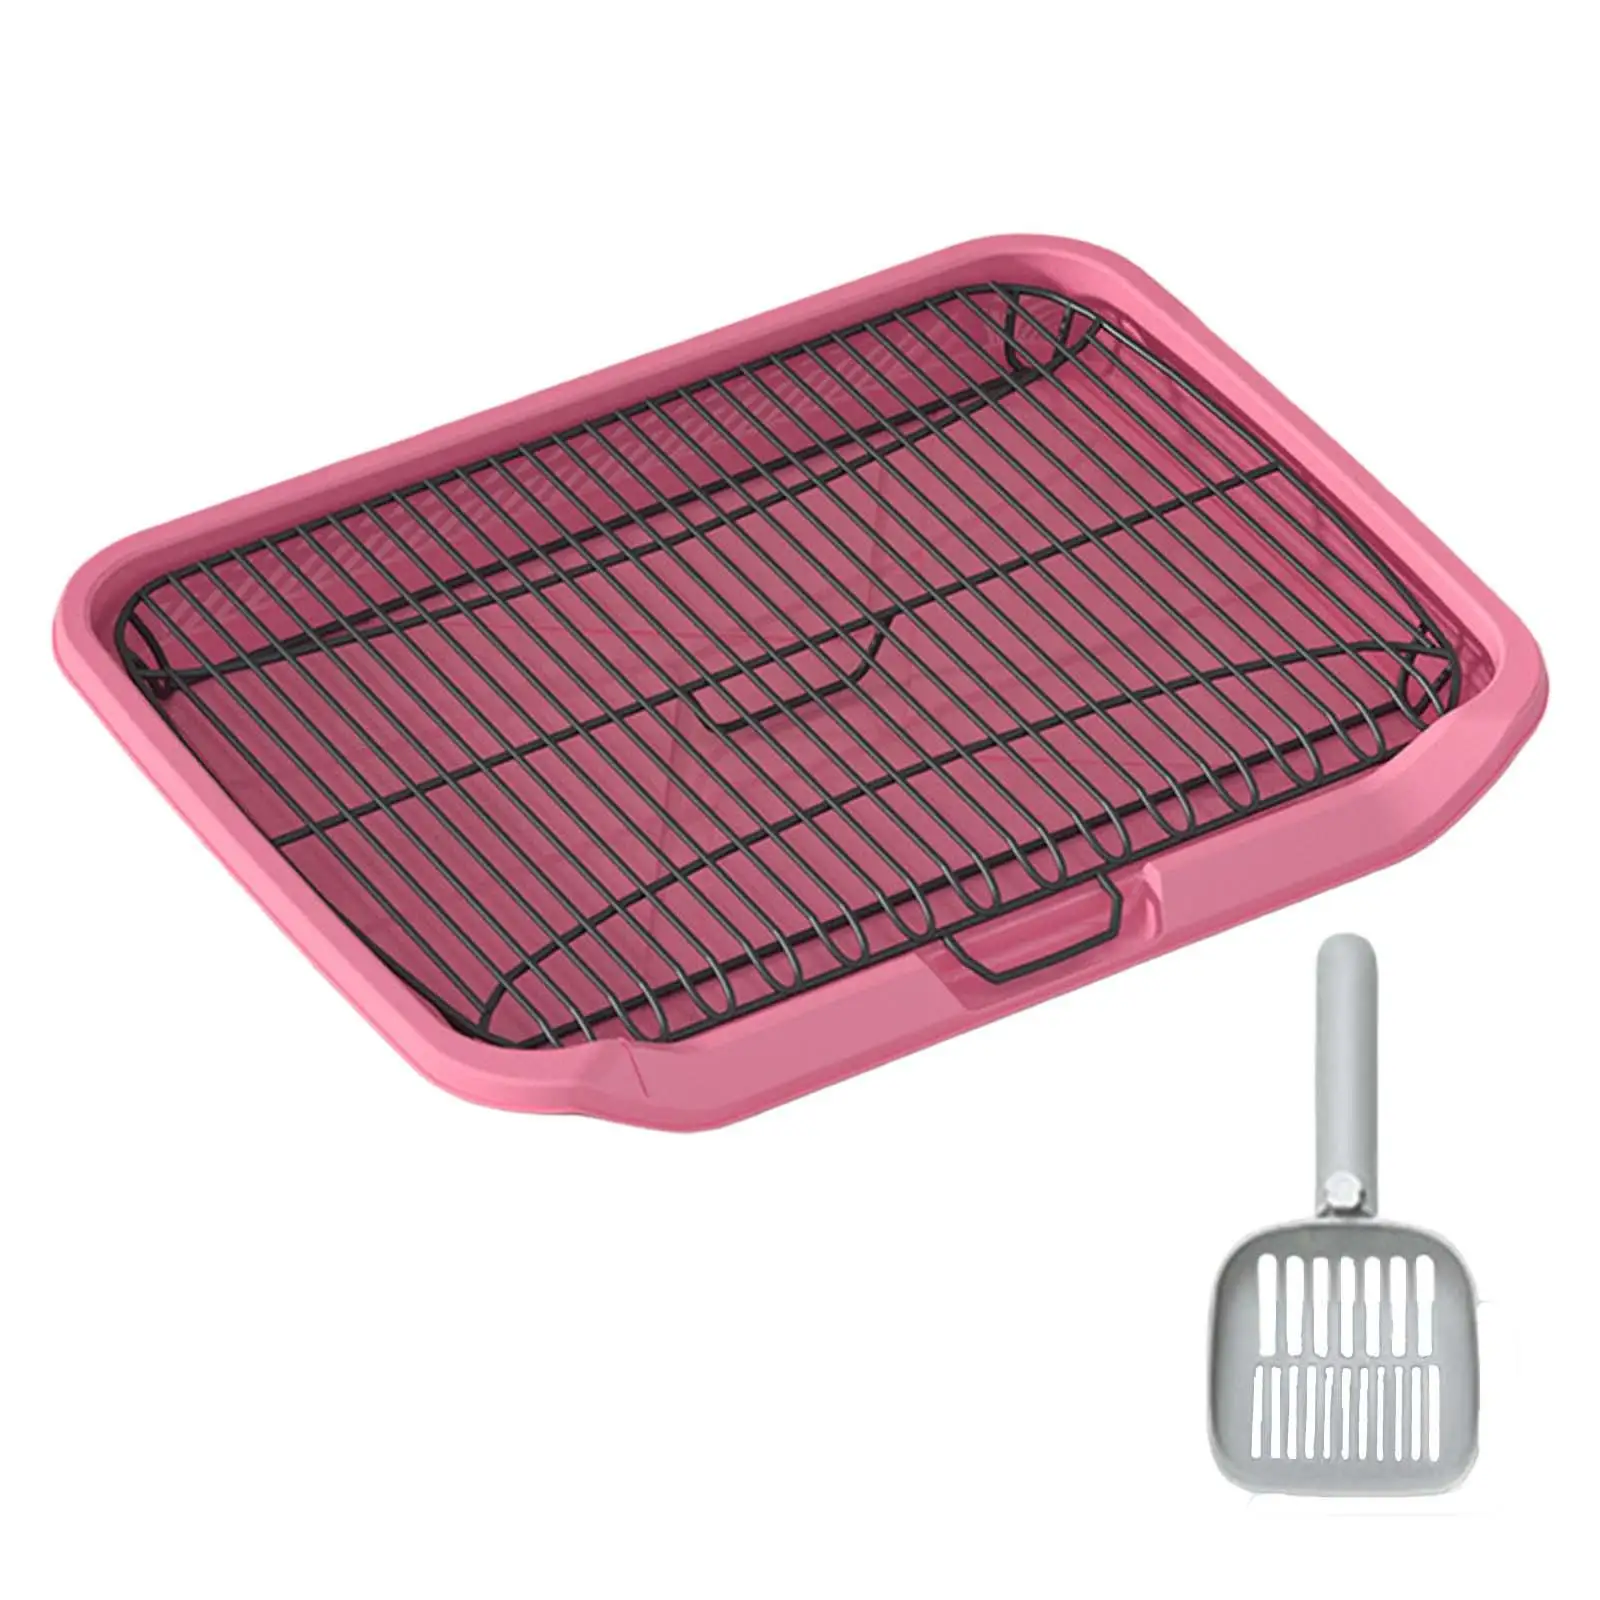 Dog Toilet Puppy Potty Tray Portable for Small and Medium Dog Litter Box Cleaning Tool Puppy Pee Pad Holder Dog Potty Tray